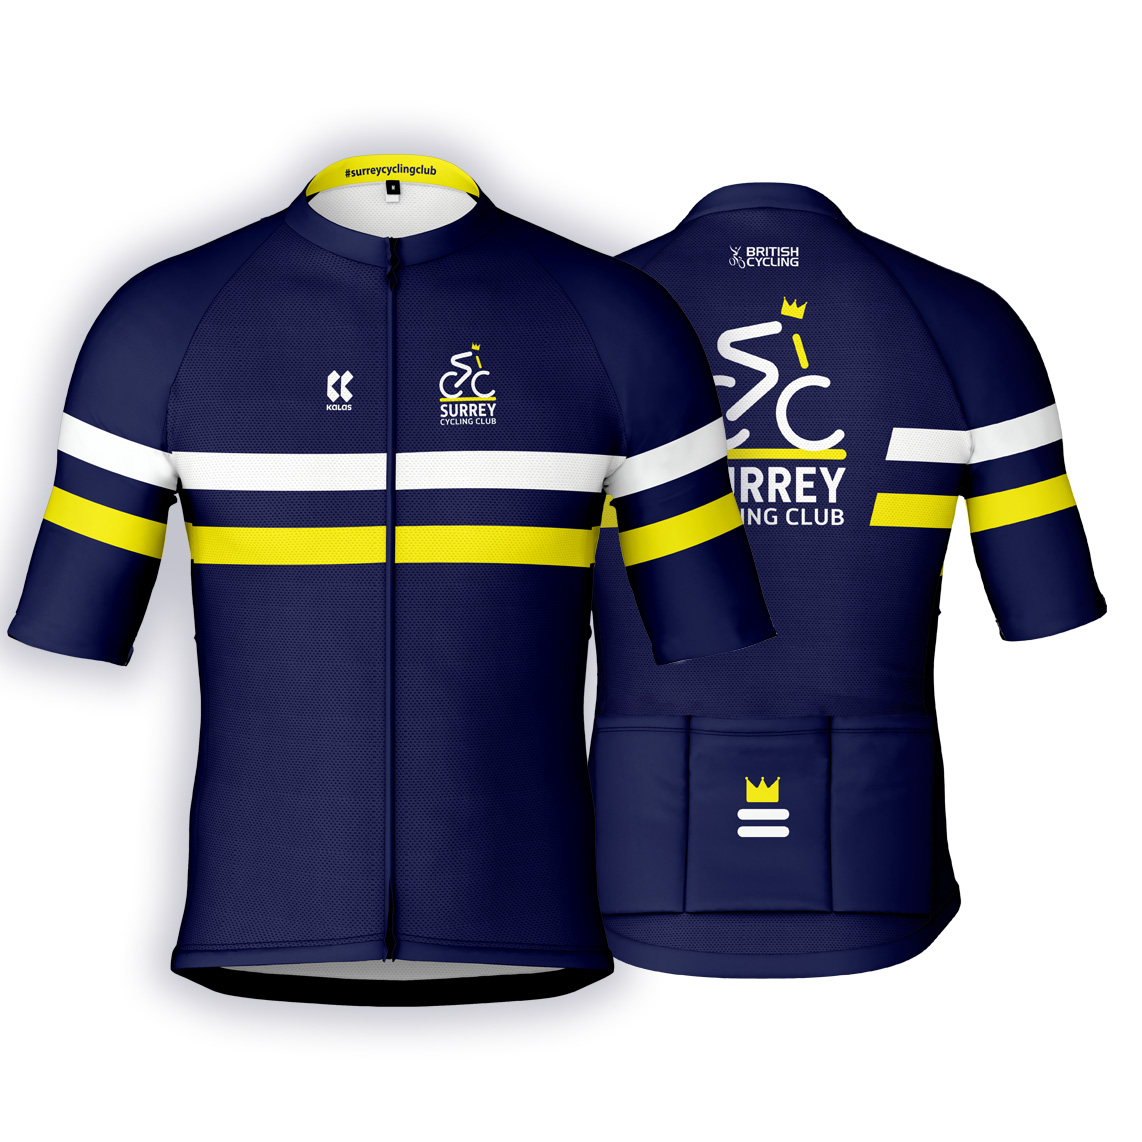 Surrey Cycling Kit. A blue and yellow cycling jersey with the words st george.